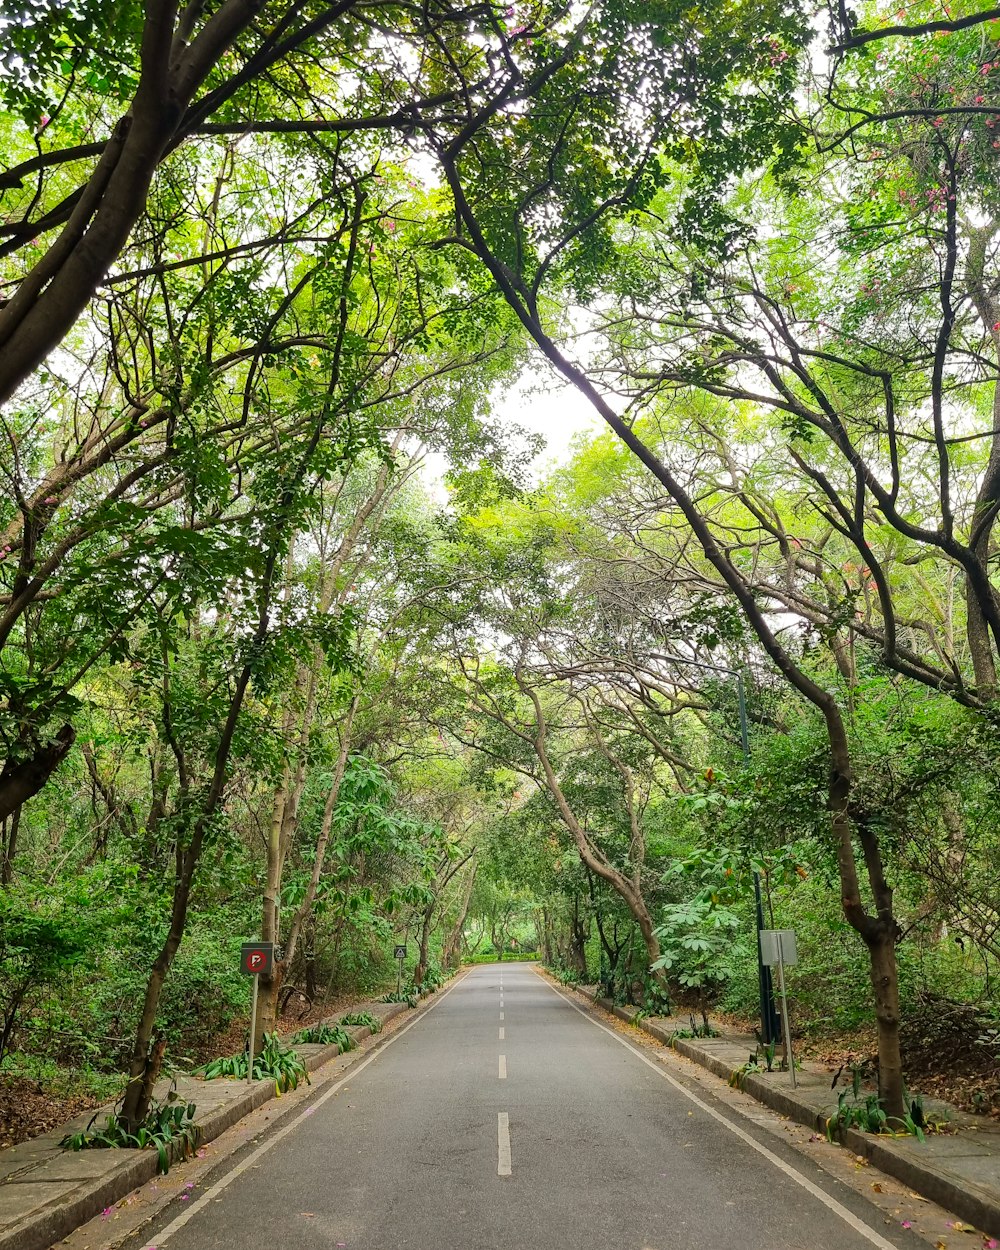 an empty road surrounded by trees and greenery